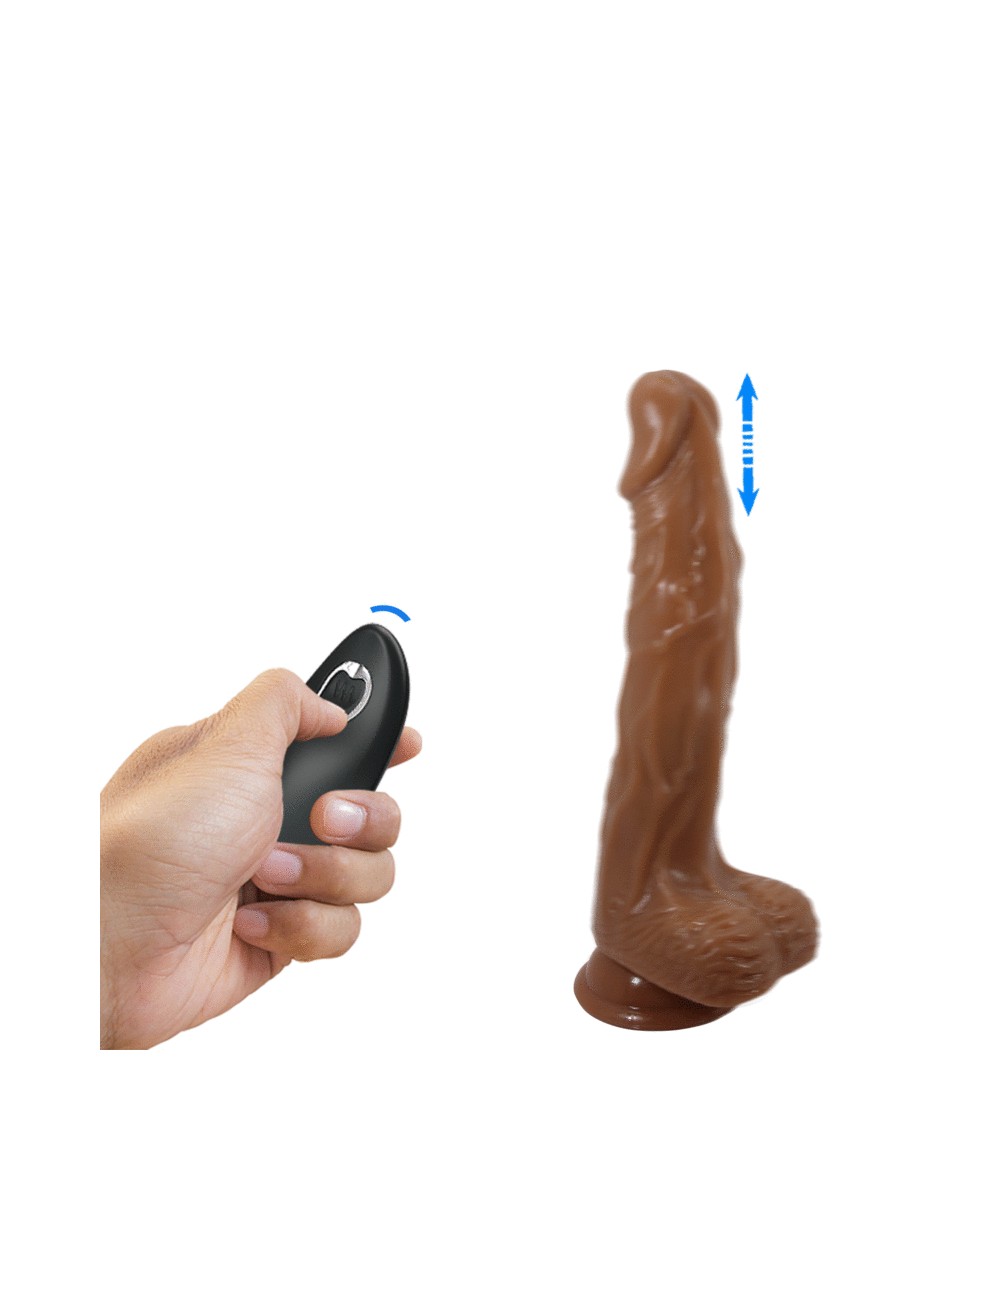 BAILE - BODACH REALISTIC VIBRATOR WITH REMOTE CONTROL SUCTION CUP